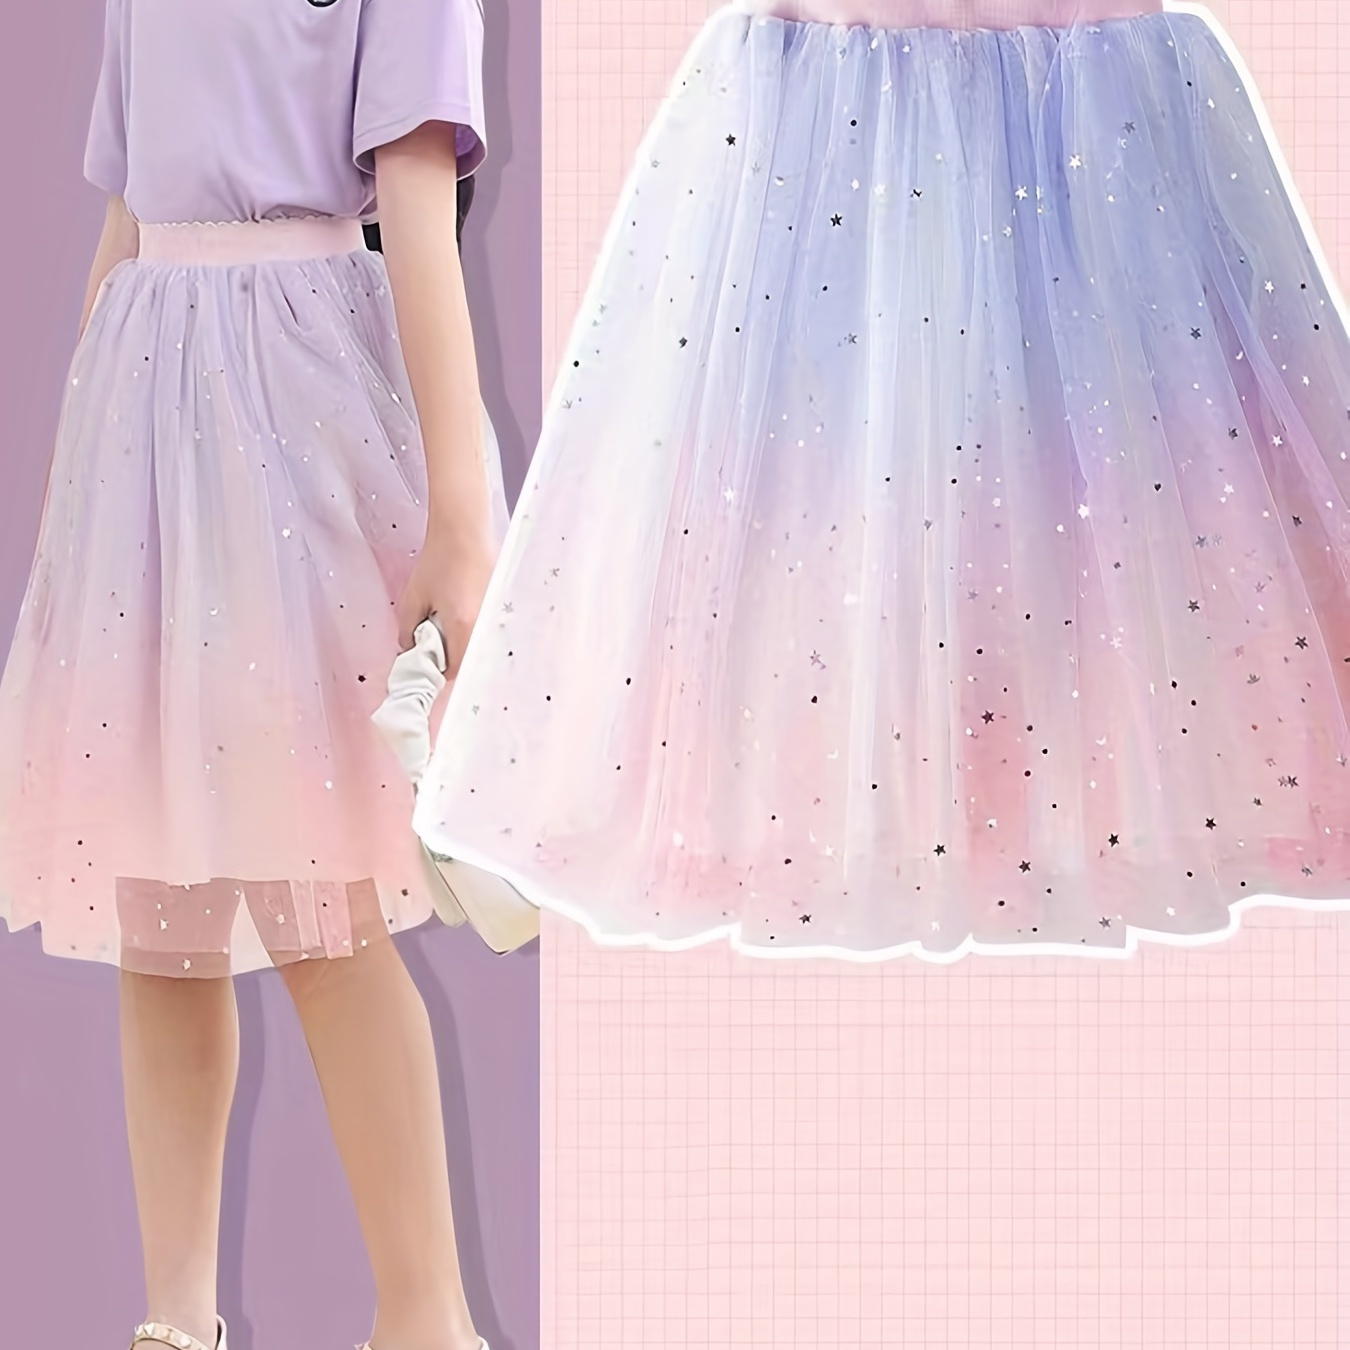 

Kid Girls' Gradient Mesh Sequin Details High Waist Skirt For Party Vacation Kids Clothing Gift